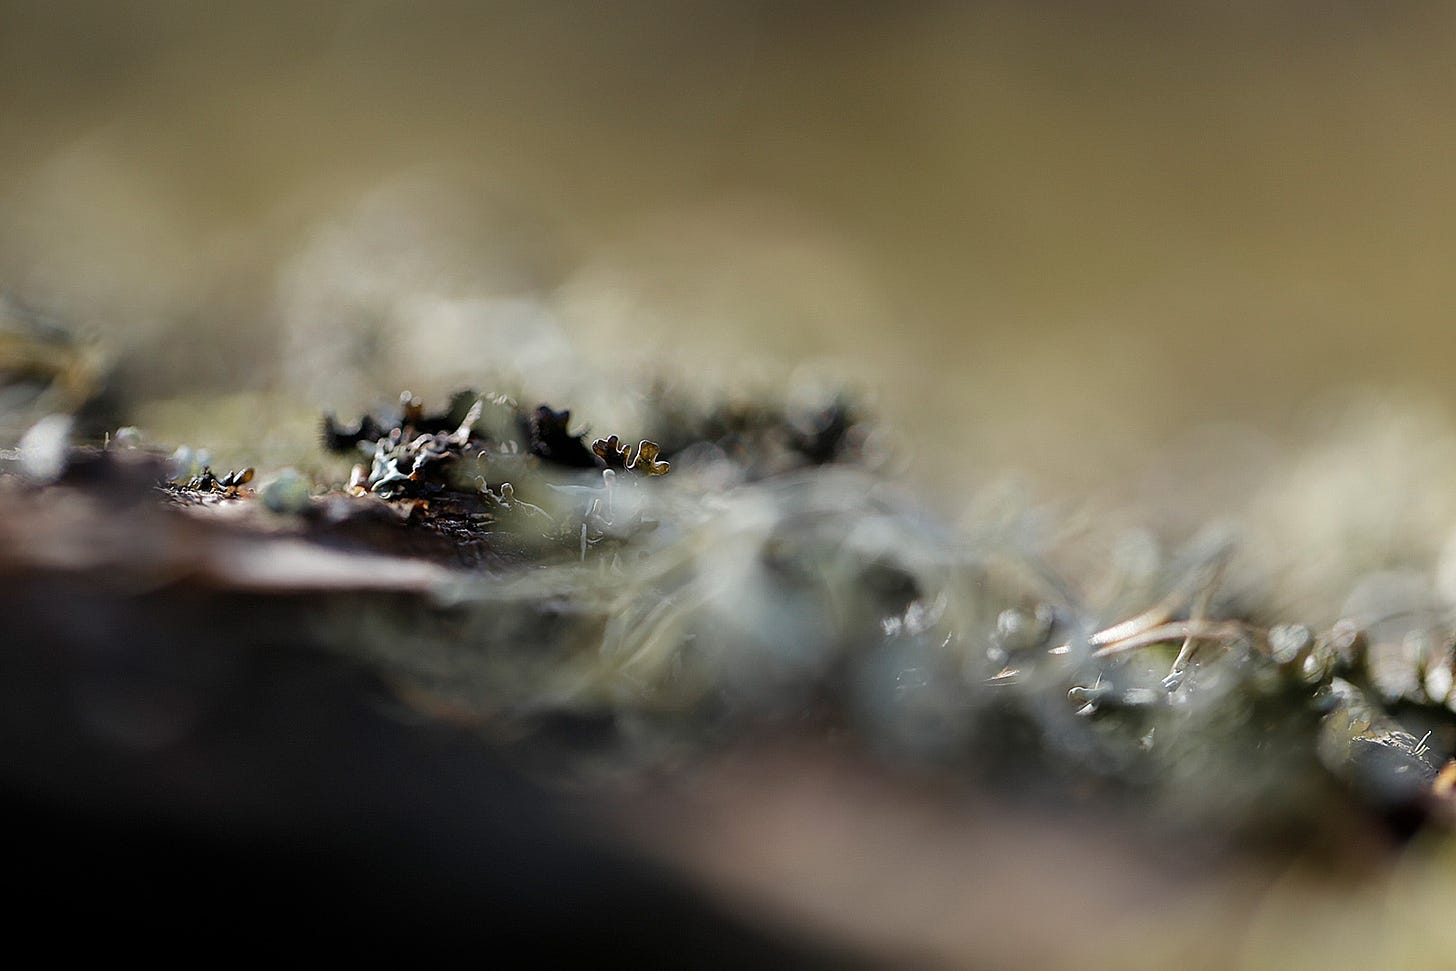 A variety of grey green lichens growing on a fallen birch tree